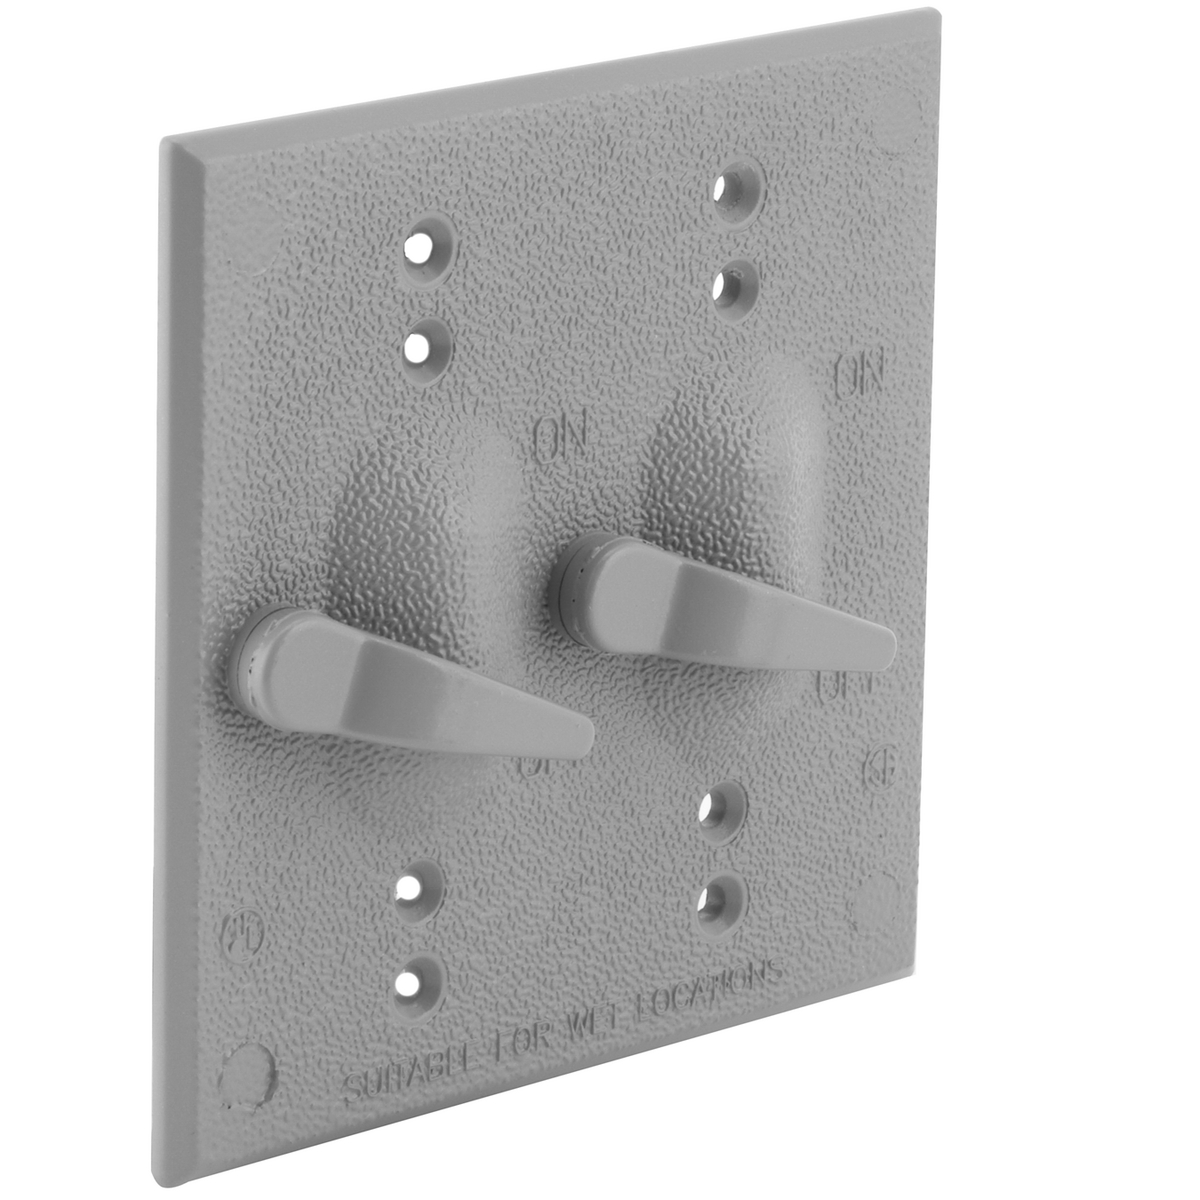 BELL 5125-0 WEATHERPROOF TWO GANG SWITCH COVER